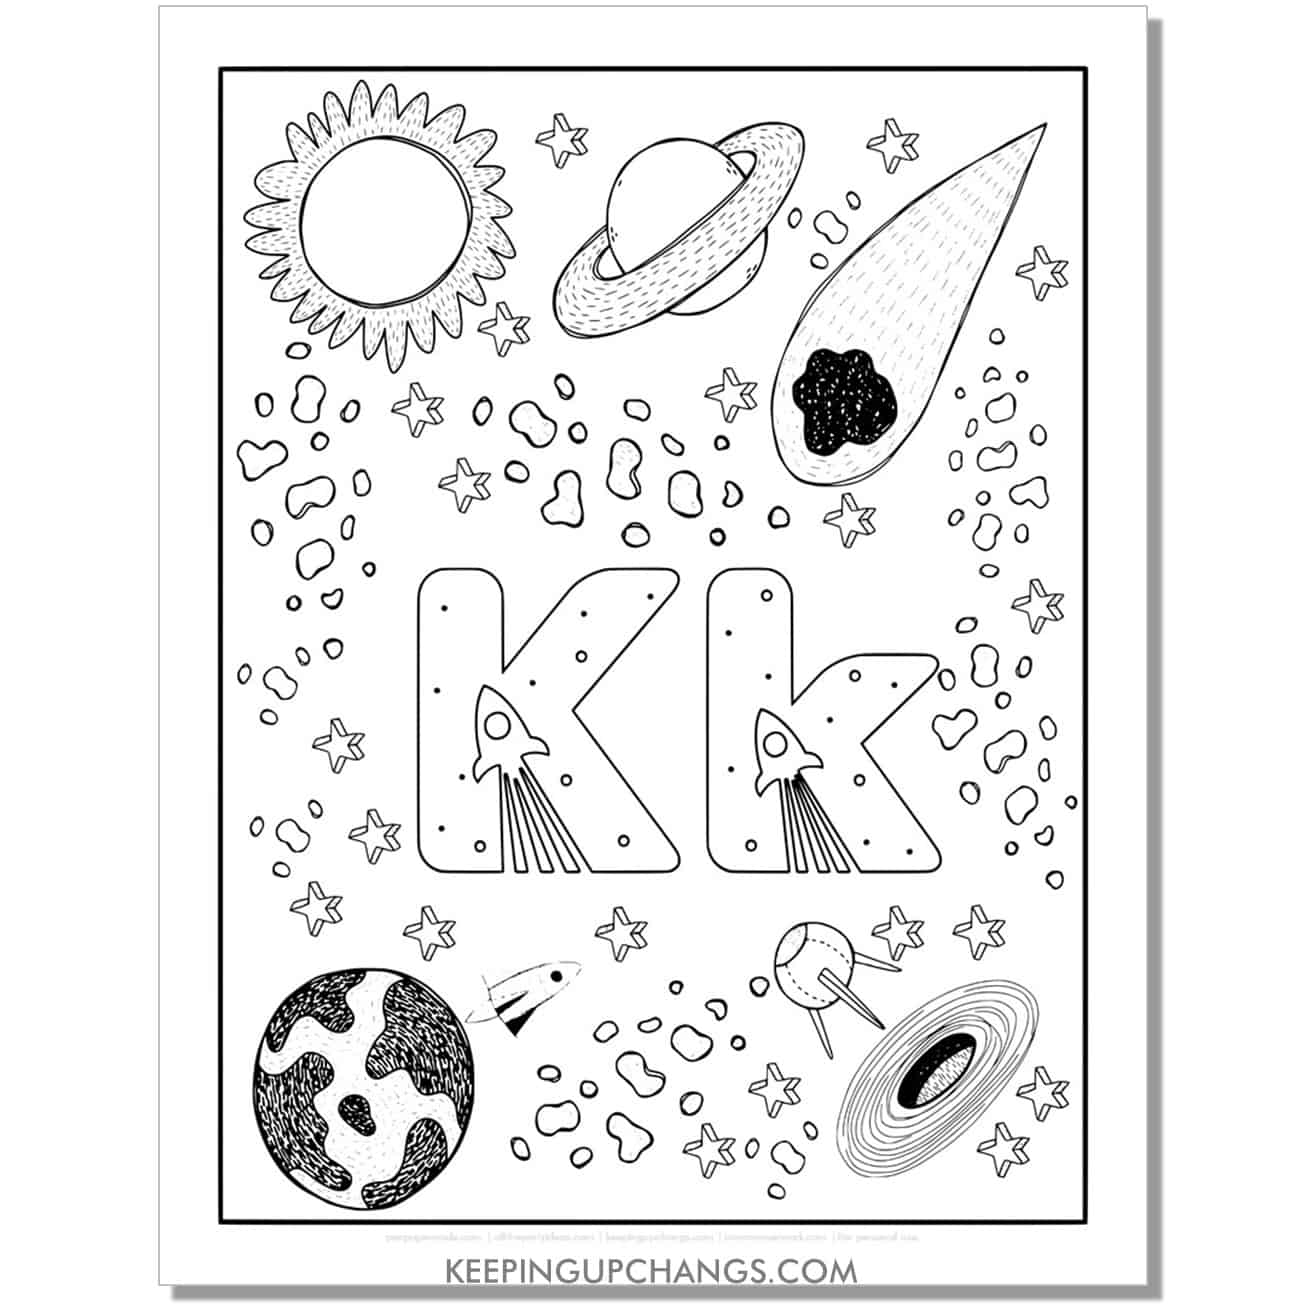 free alphabet letter k coloring page for kids with rockets, space theme.